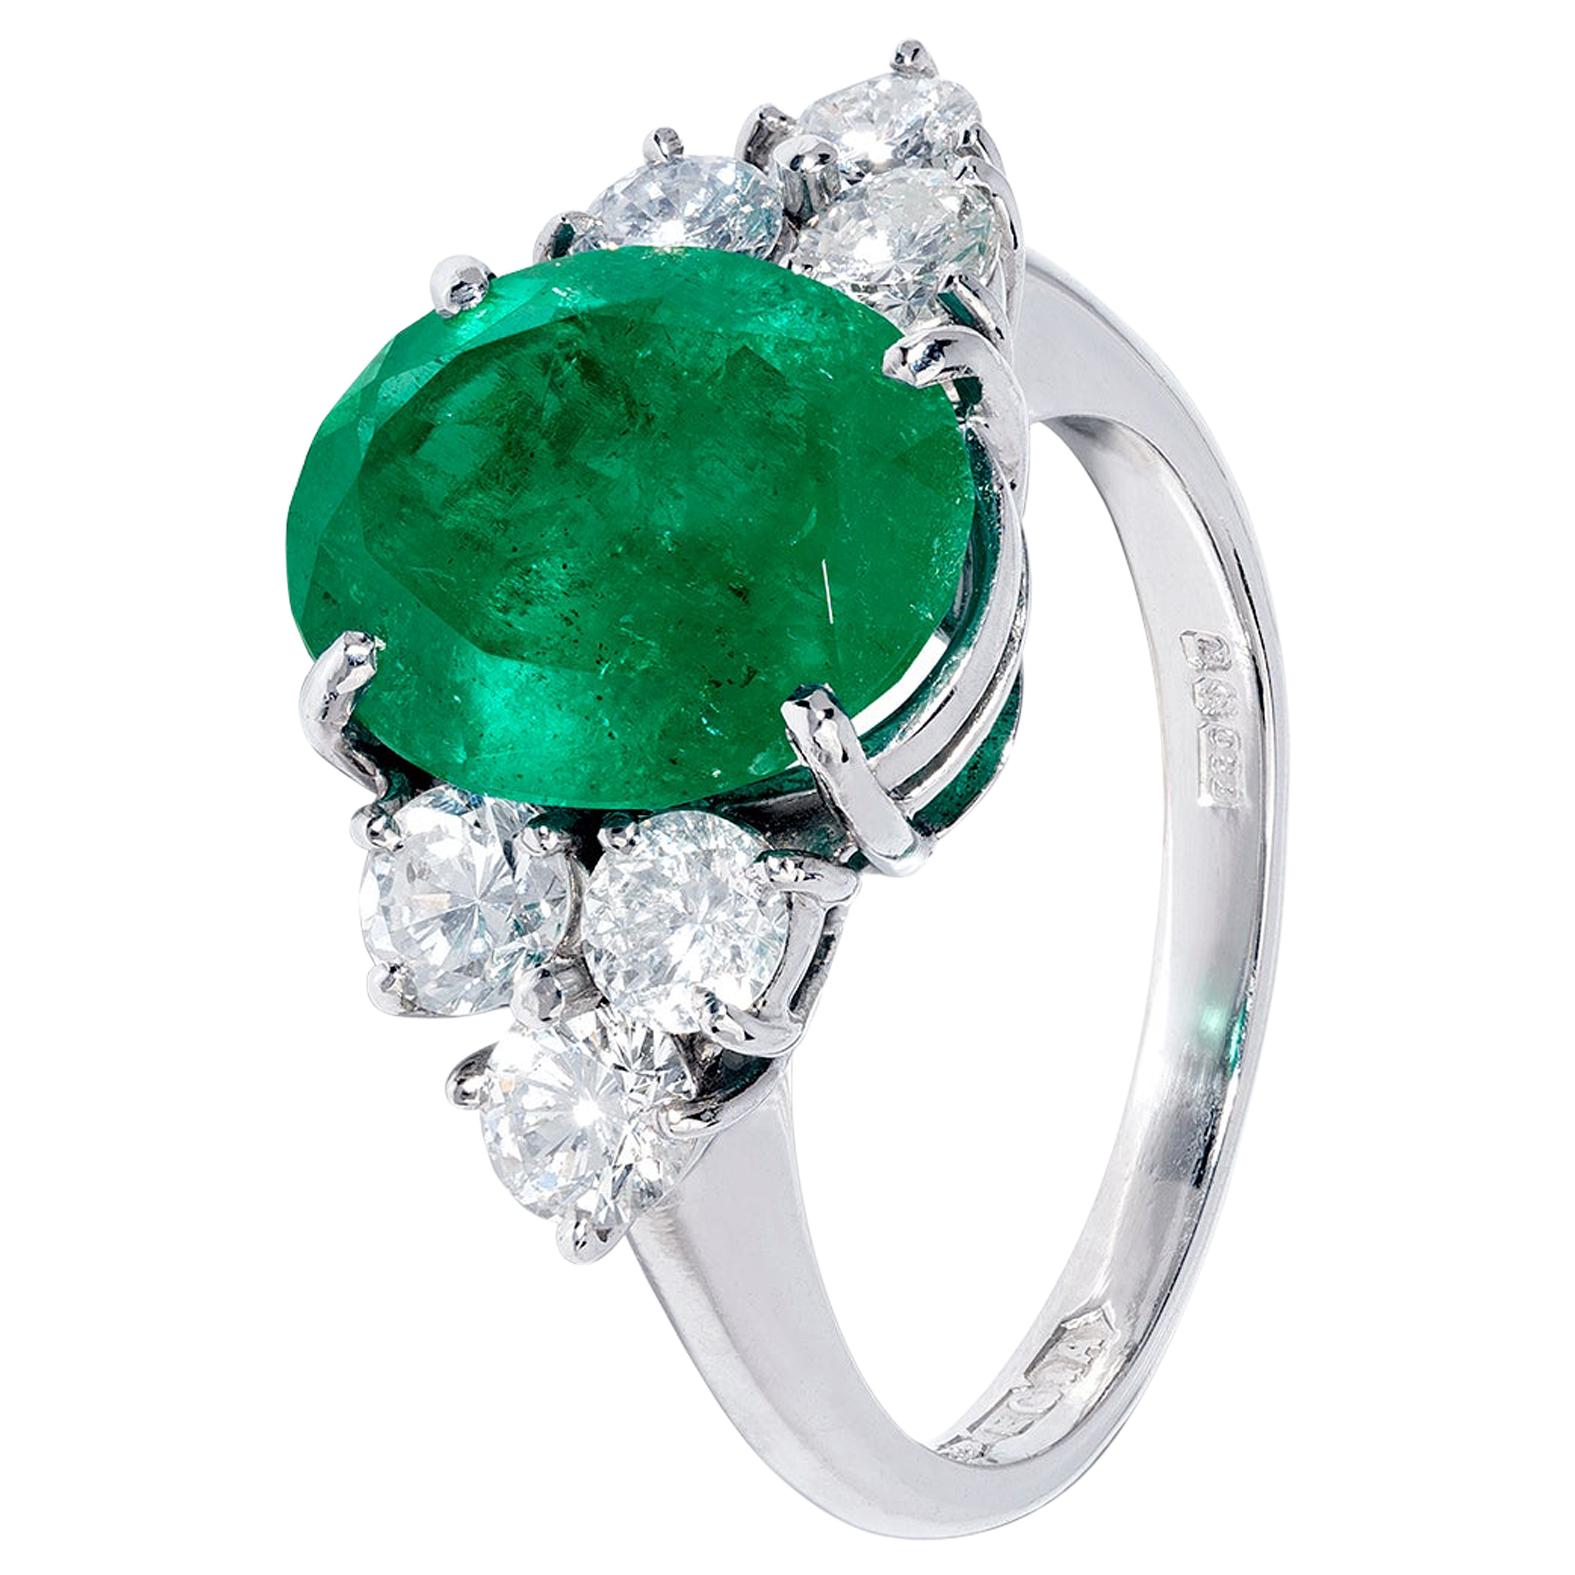 2.87 Carats Emerald Ring with Diamonds in White Gold